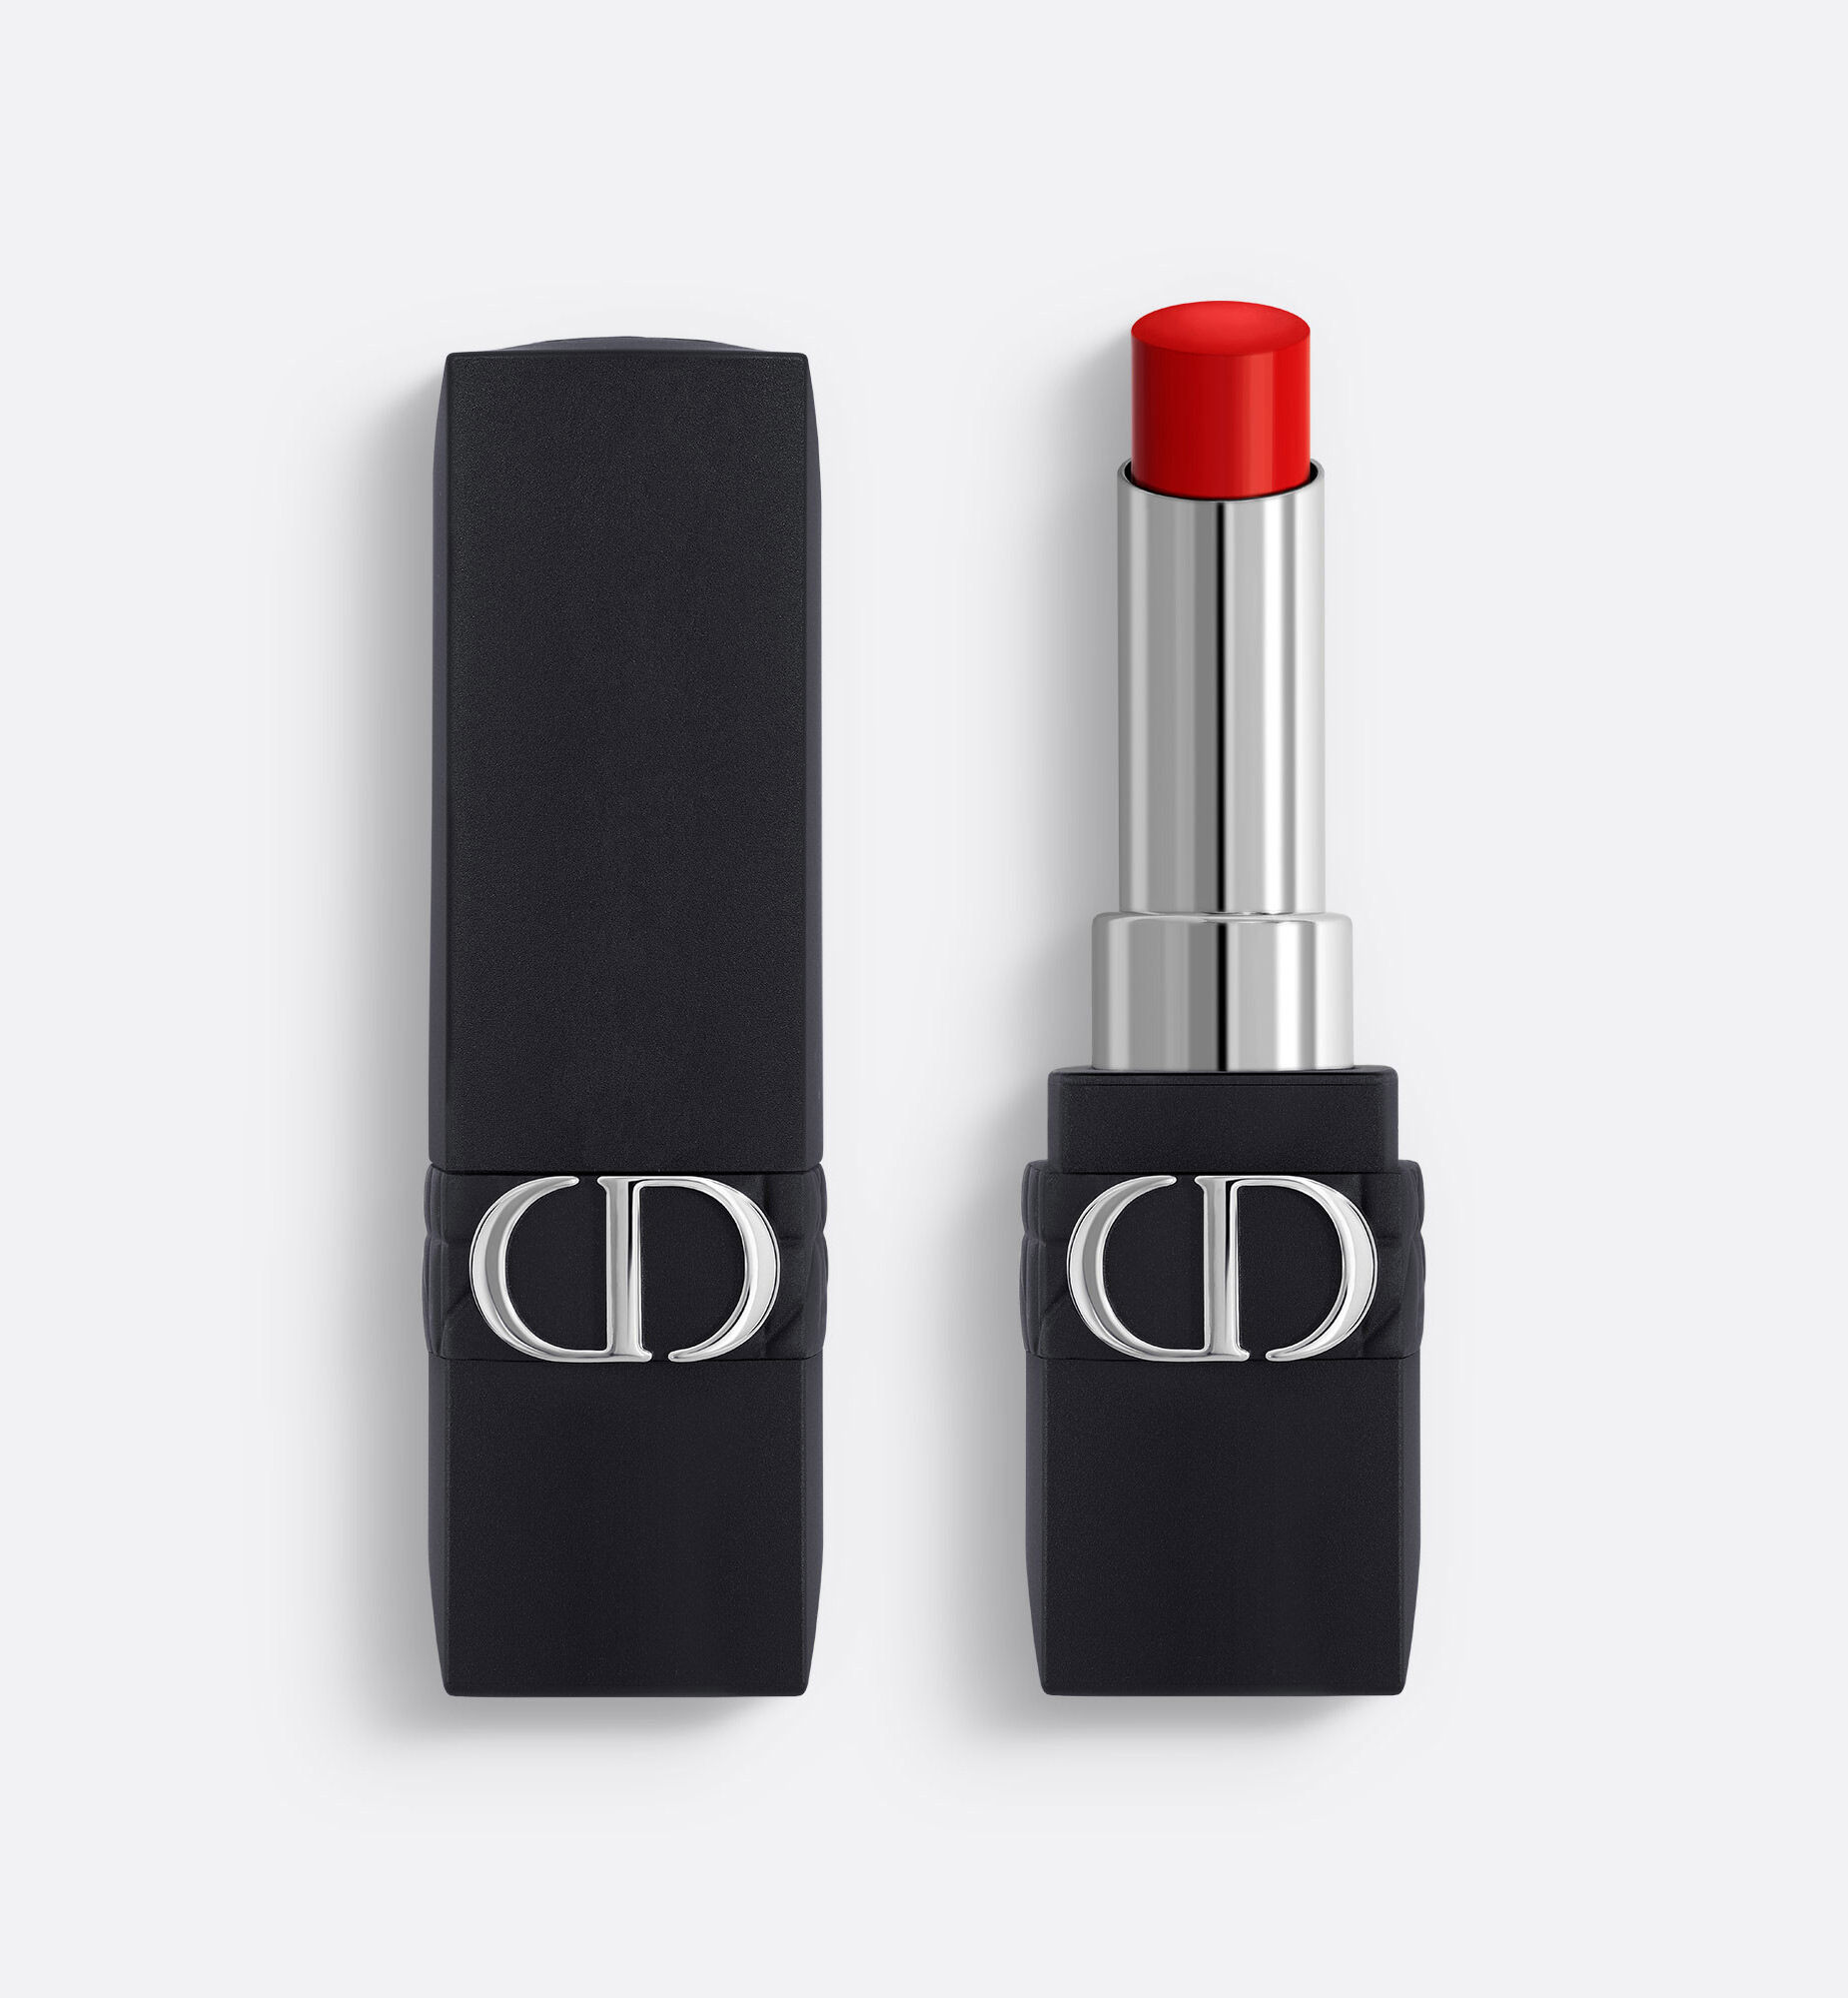 Dior Beauty Celebrates Shade 999 On September 9th  Beauty Packaging